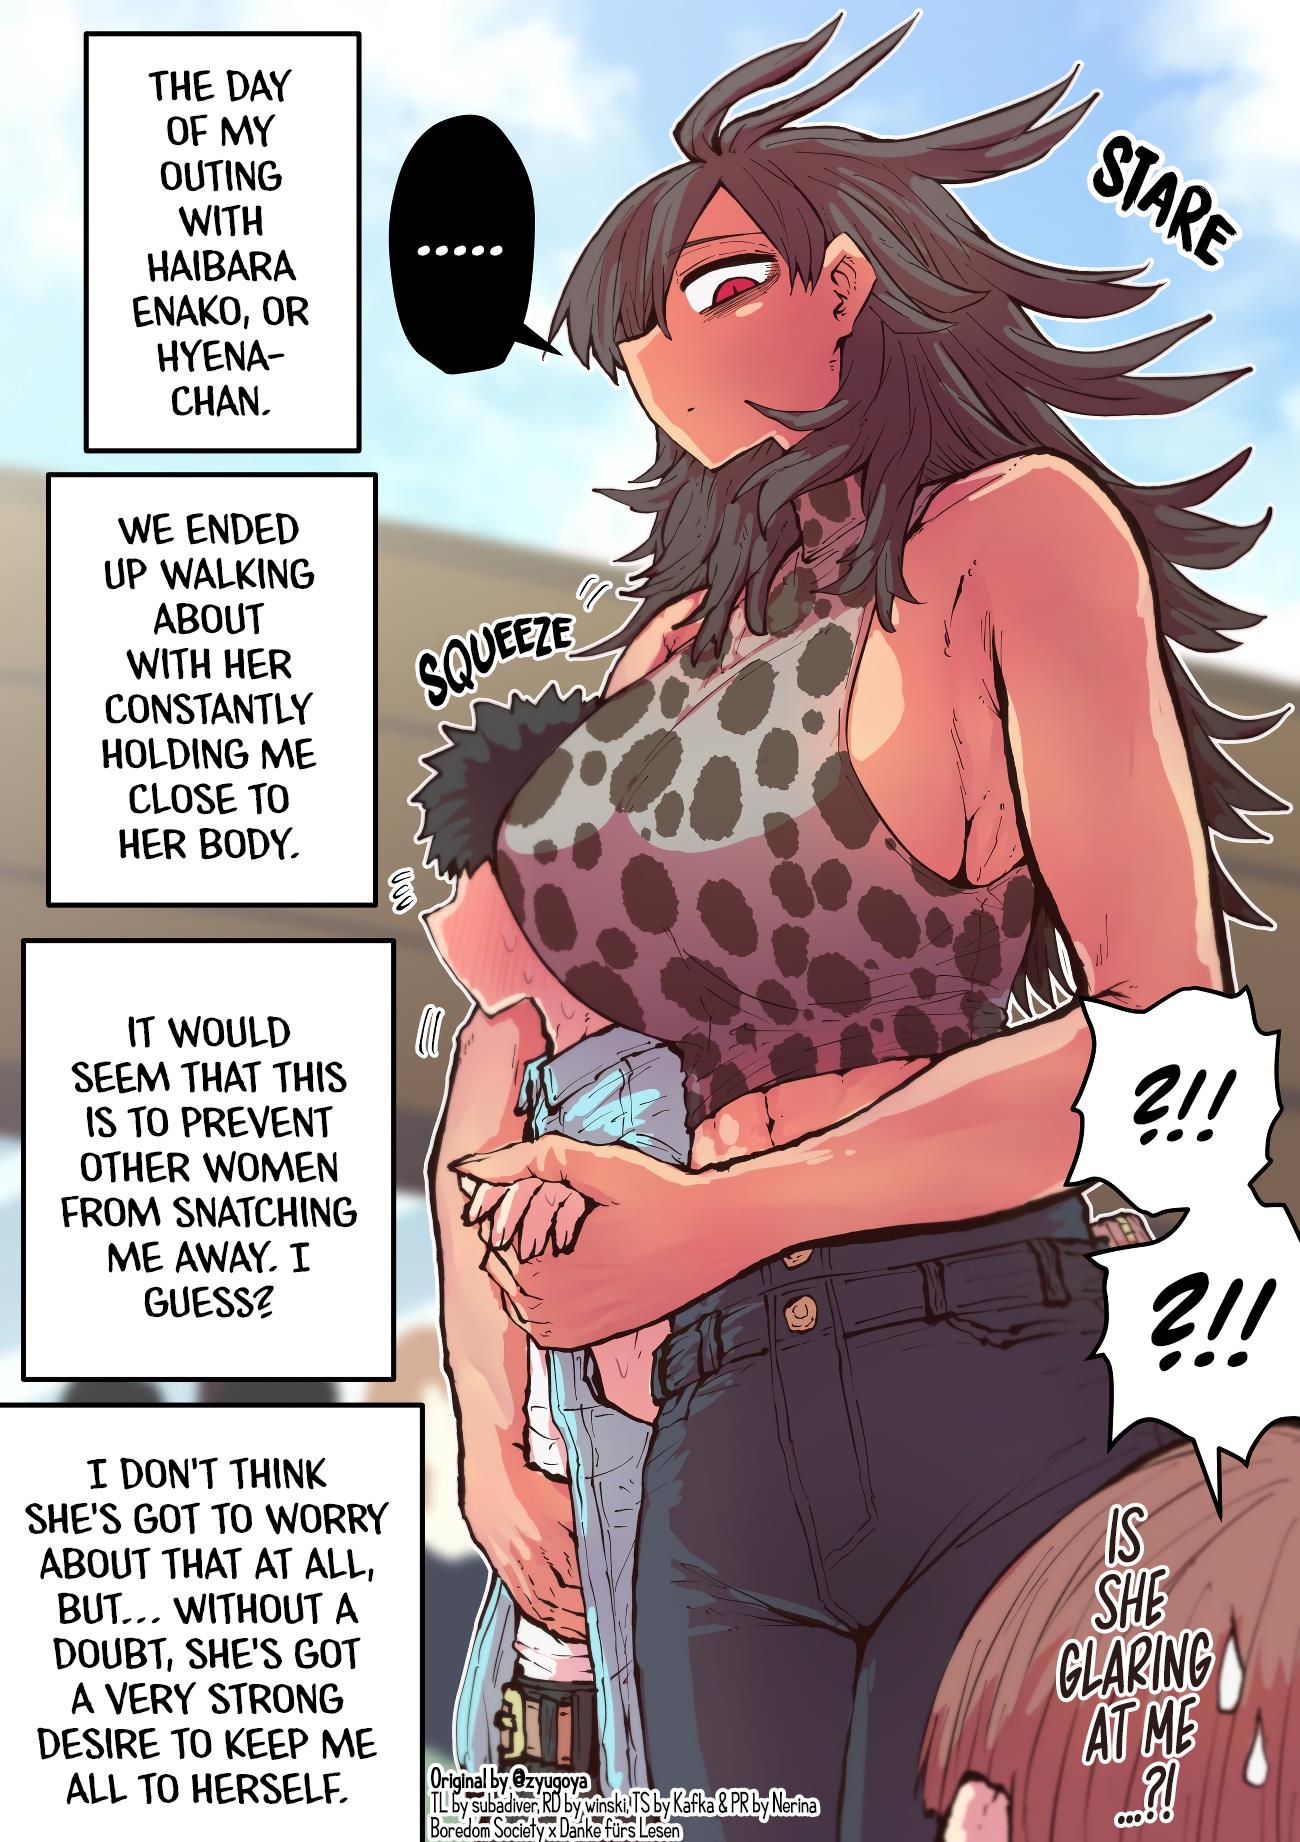 Being Targeted By Hyena-Chan - Page 1